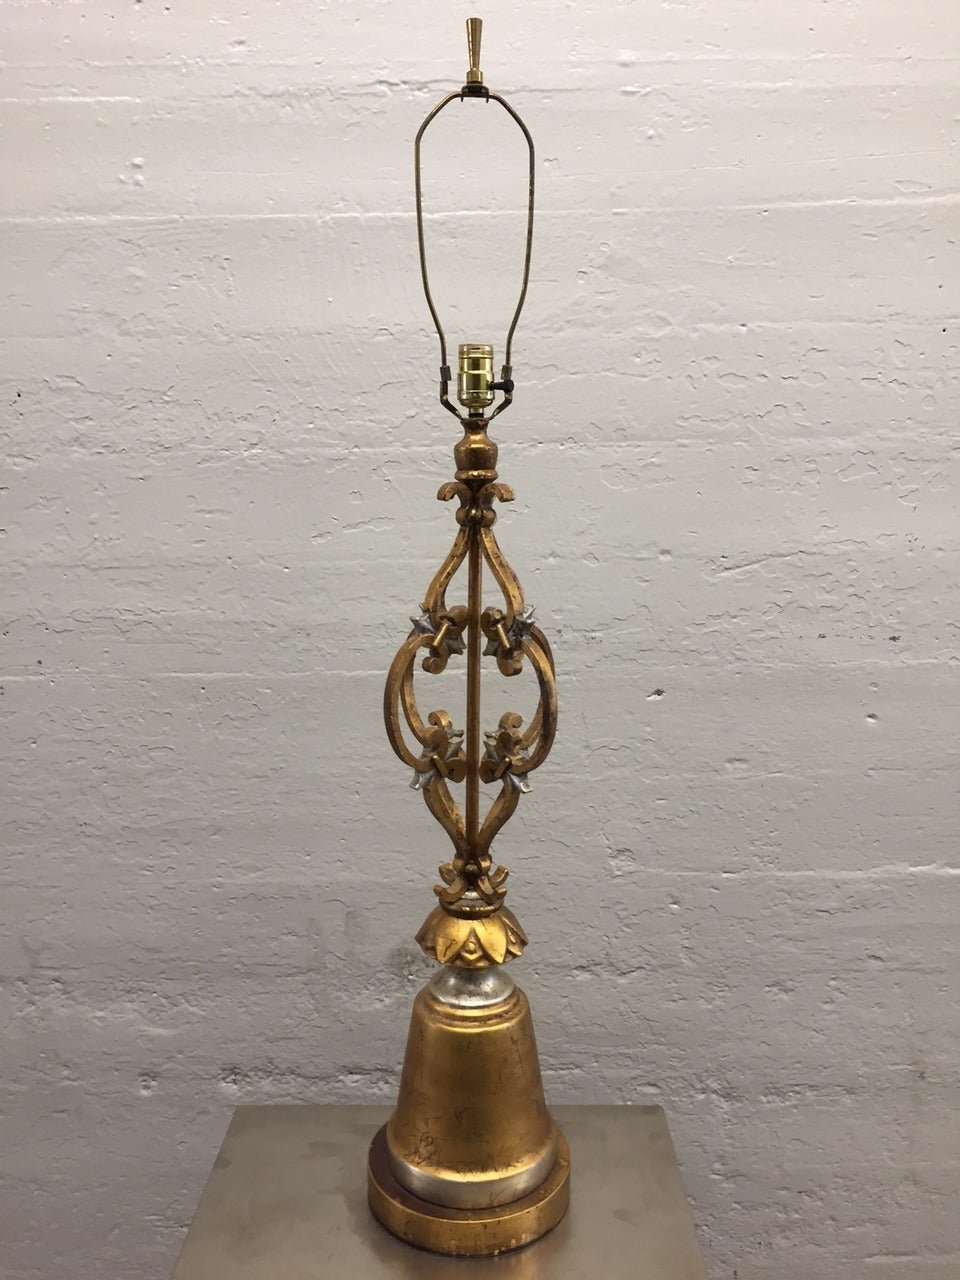 Pair of Hollywood Regency wrought iron gold leaf lamps.
Measures: 44.5H (to top of finial). Under socket: 32 height, diameter: 8.5
Shades not included. Arturo Pani Style.